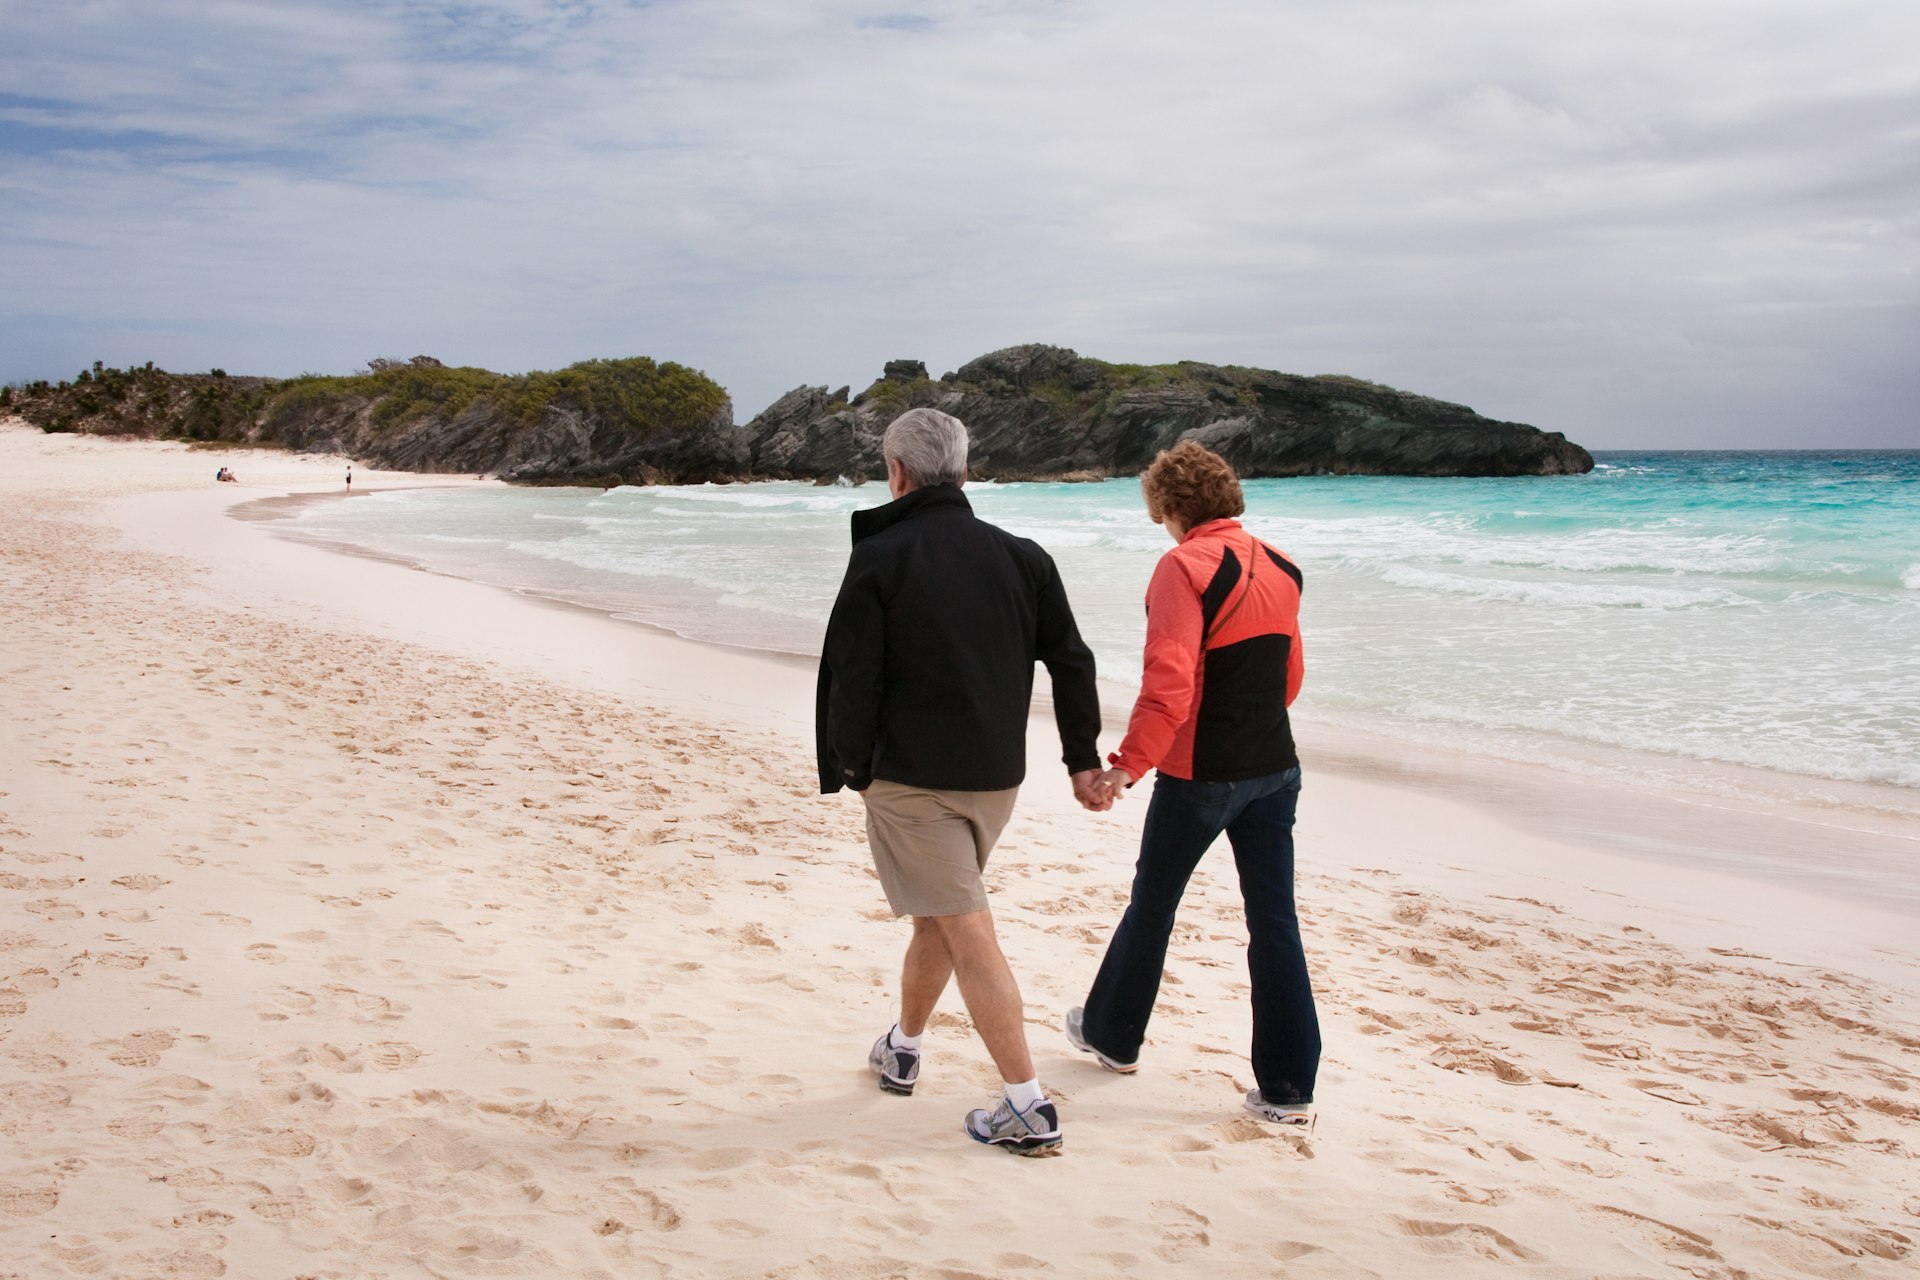 Healthy and fit couple in their 60's, walking on sandy beach in Bermuda in March, holding hands.